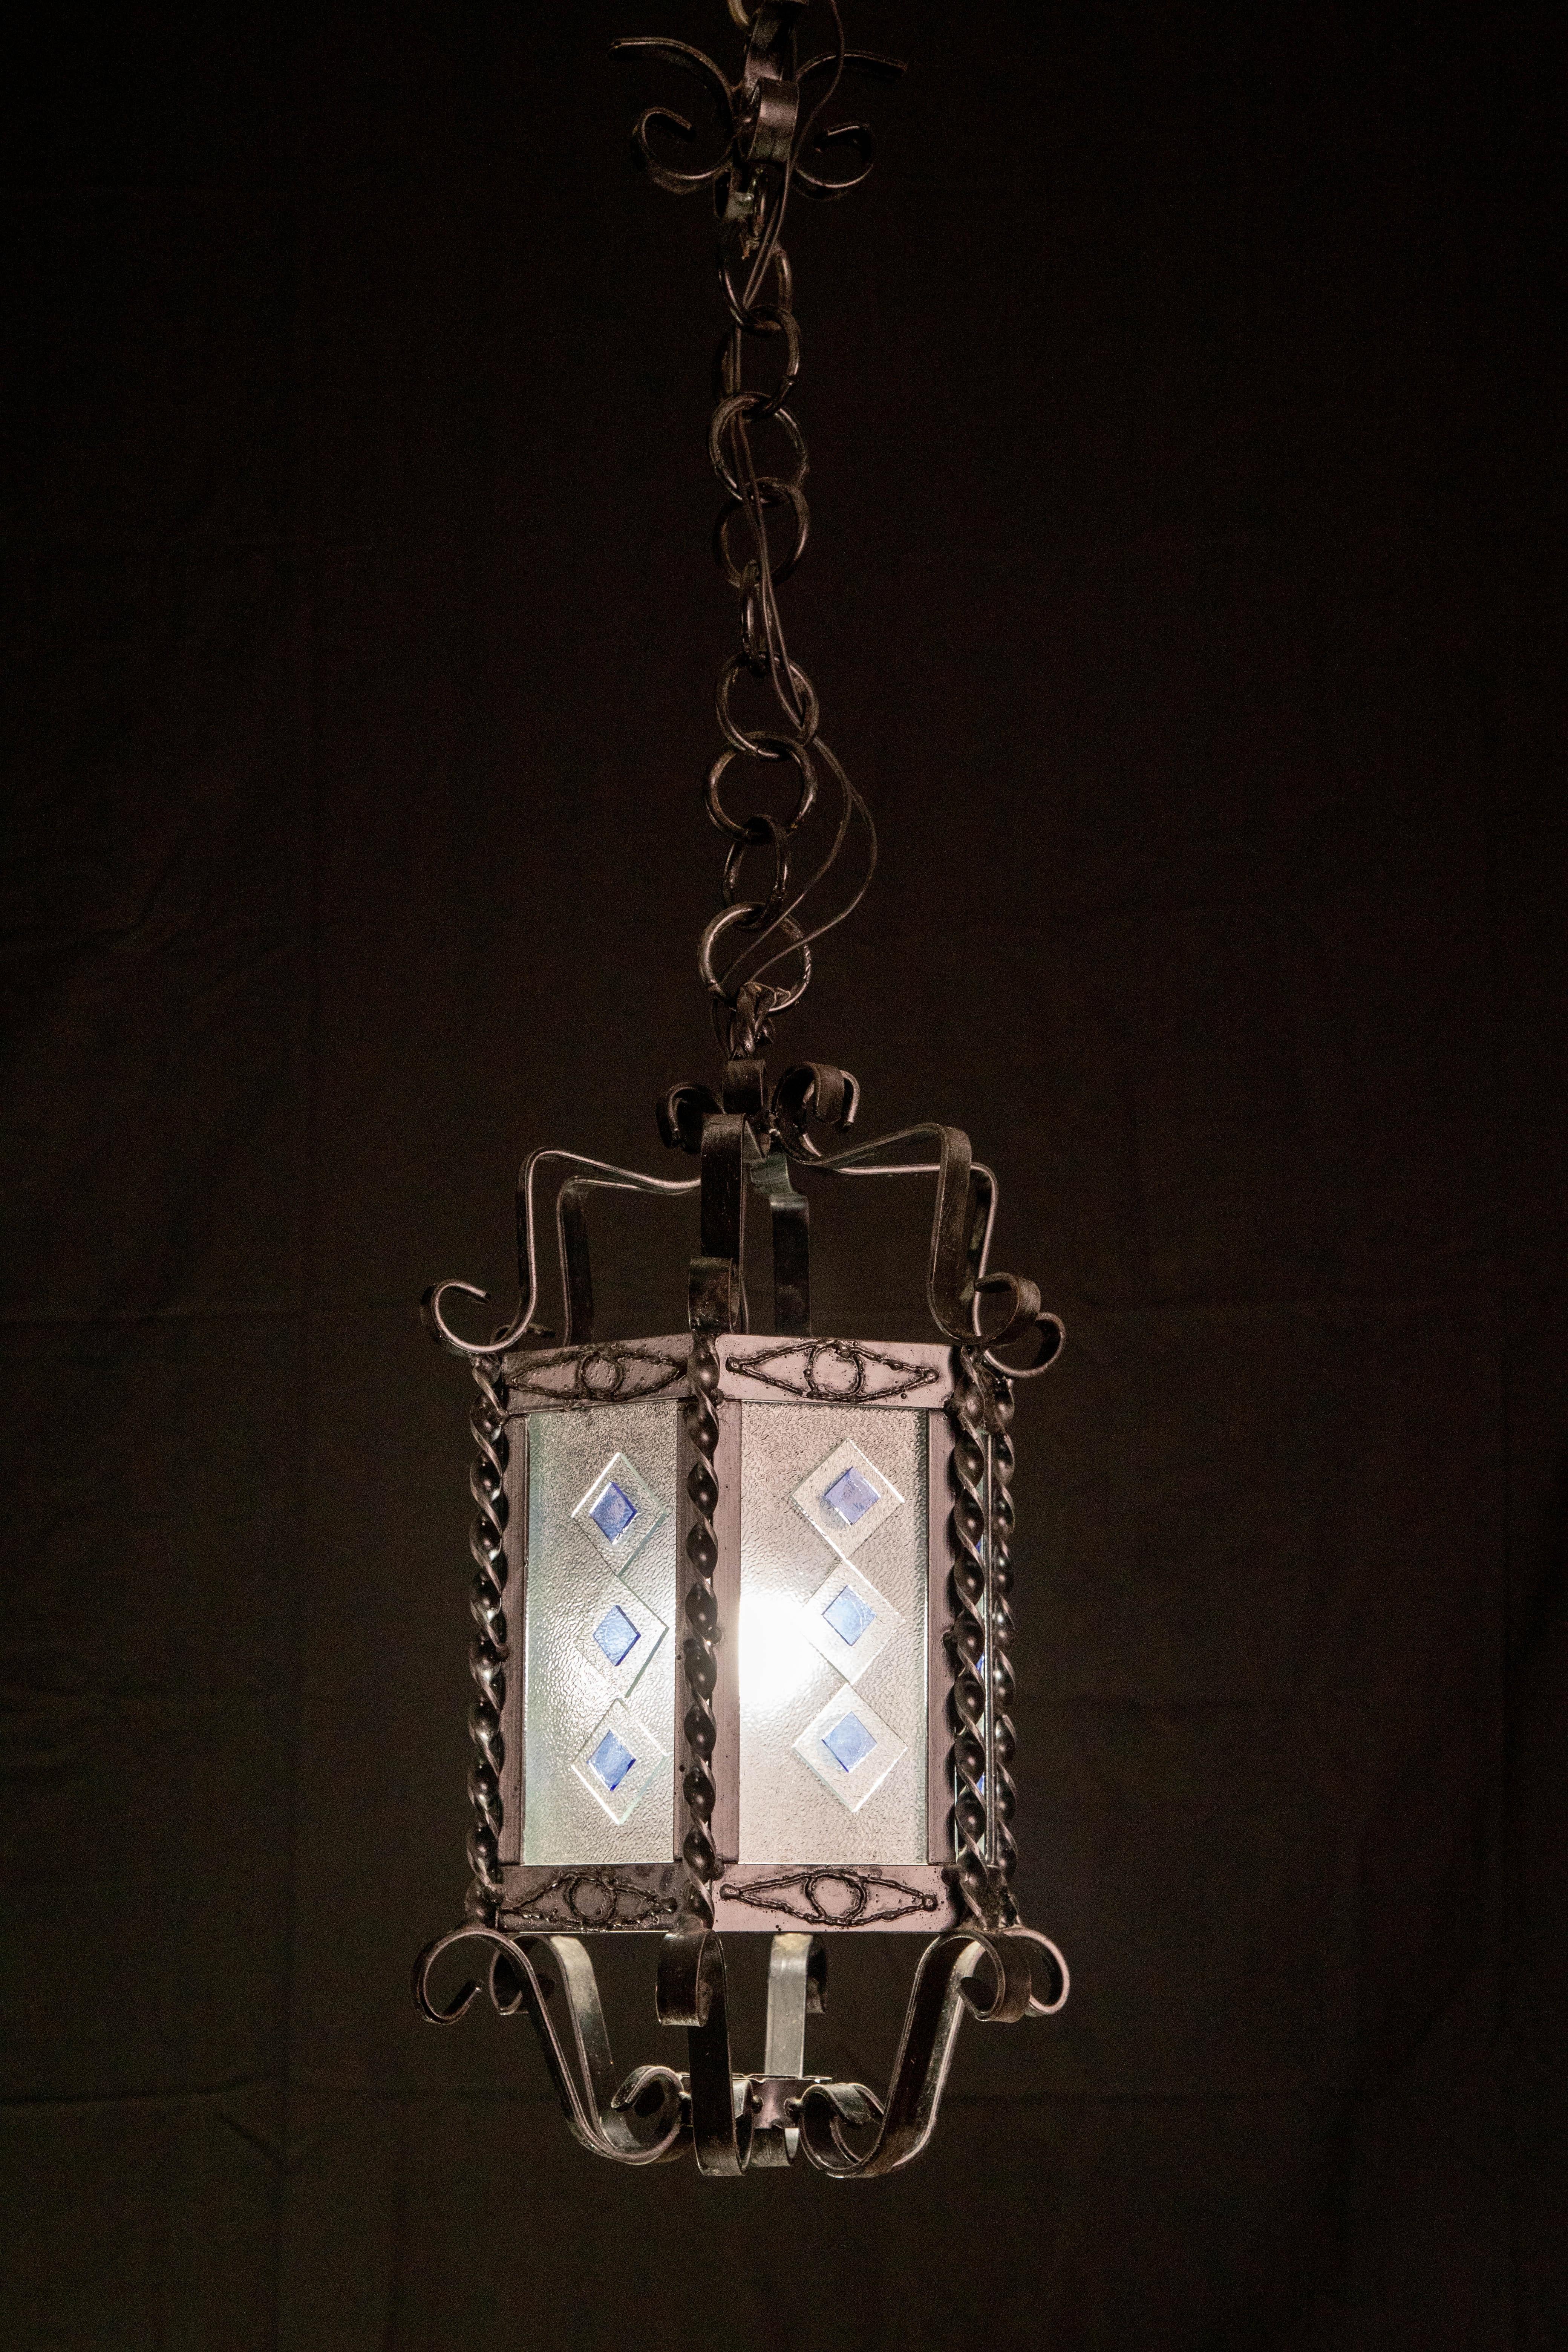 Splendid Italian lanterns made around the 1960s.
Measurements: 90 cm in height and 30 in diameter, 50 cm without chain.
Mount a European standard e27 light.
There are signs of aging on the structure that give it a history and a certain